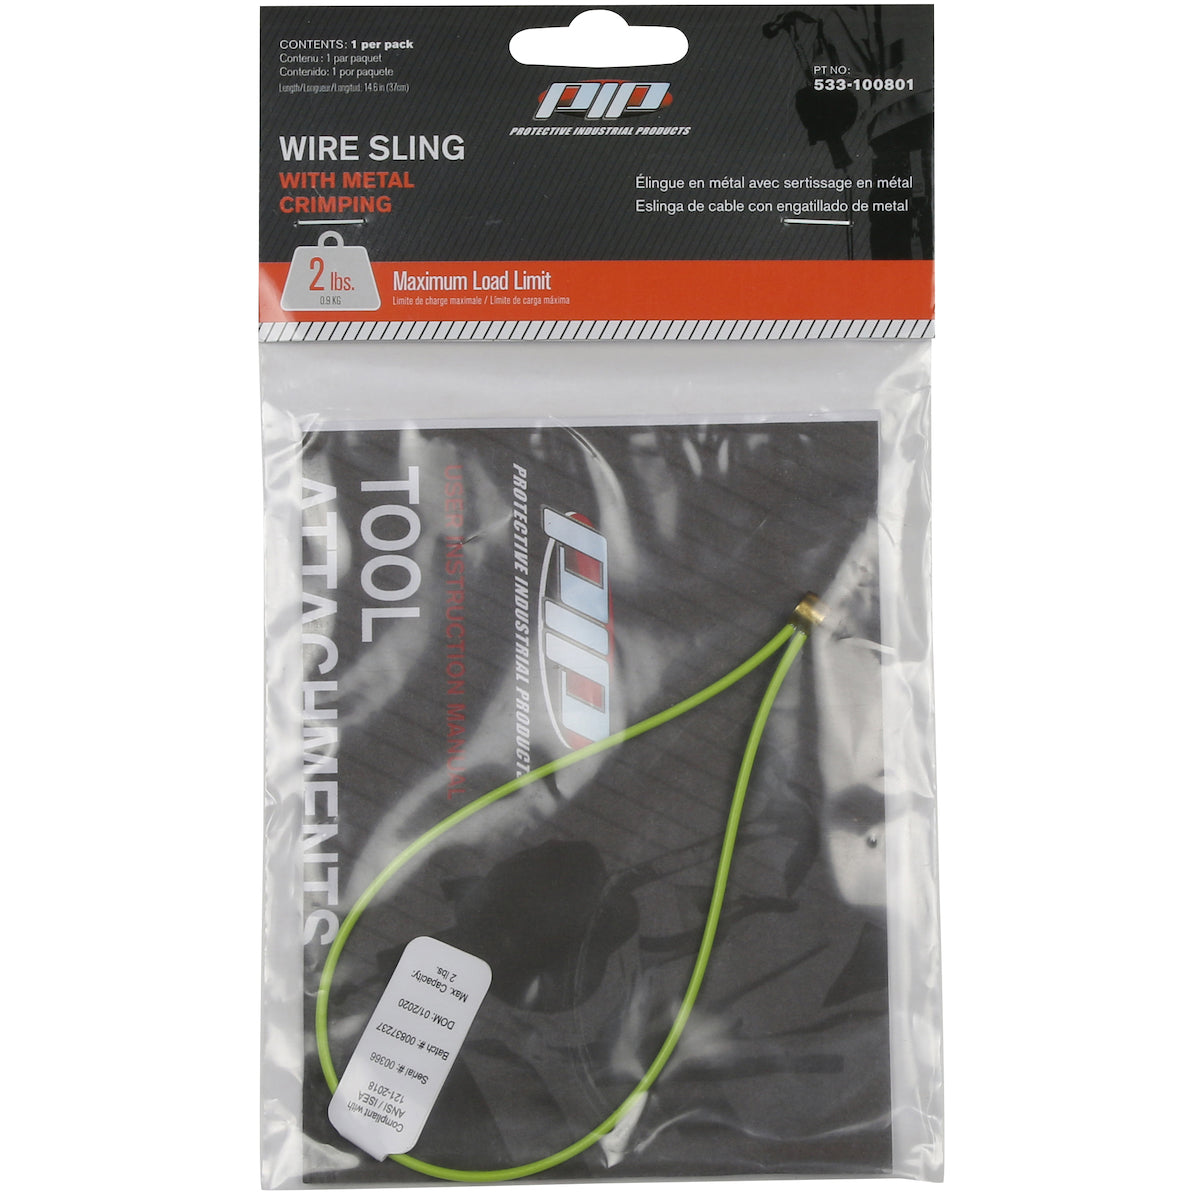 PIP 533-100801 Wire Sling Loop - 2 lbs. maximum load limit - Retail Packaged